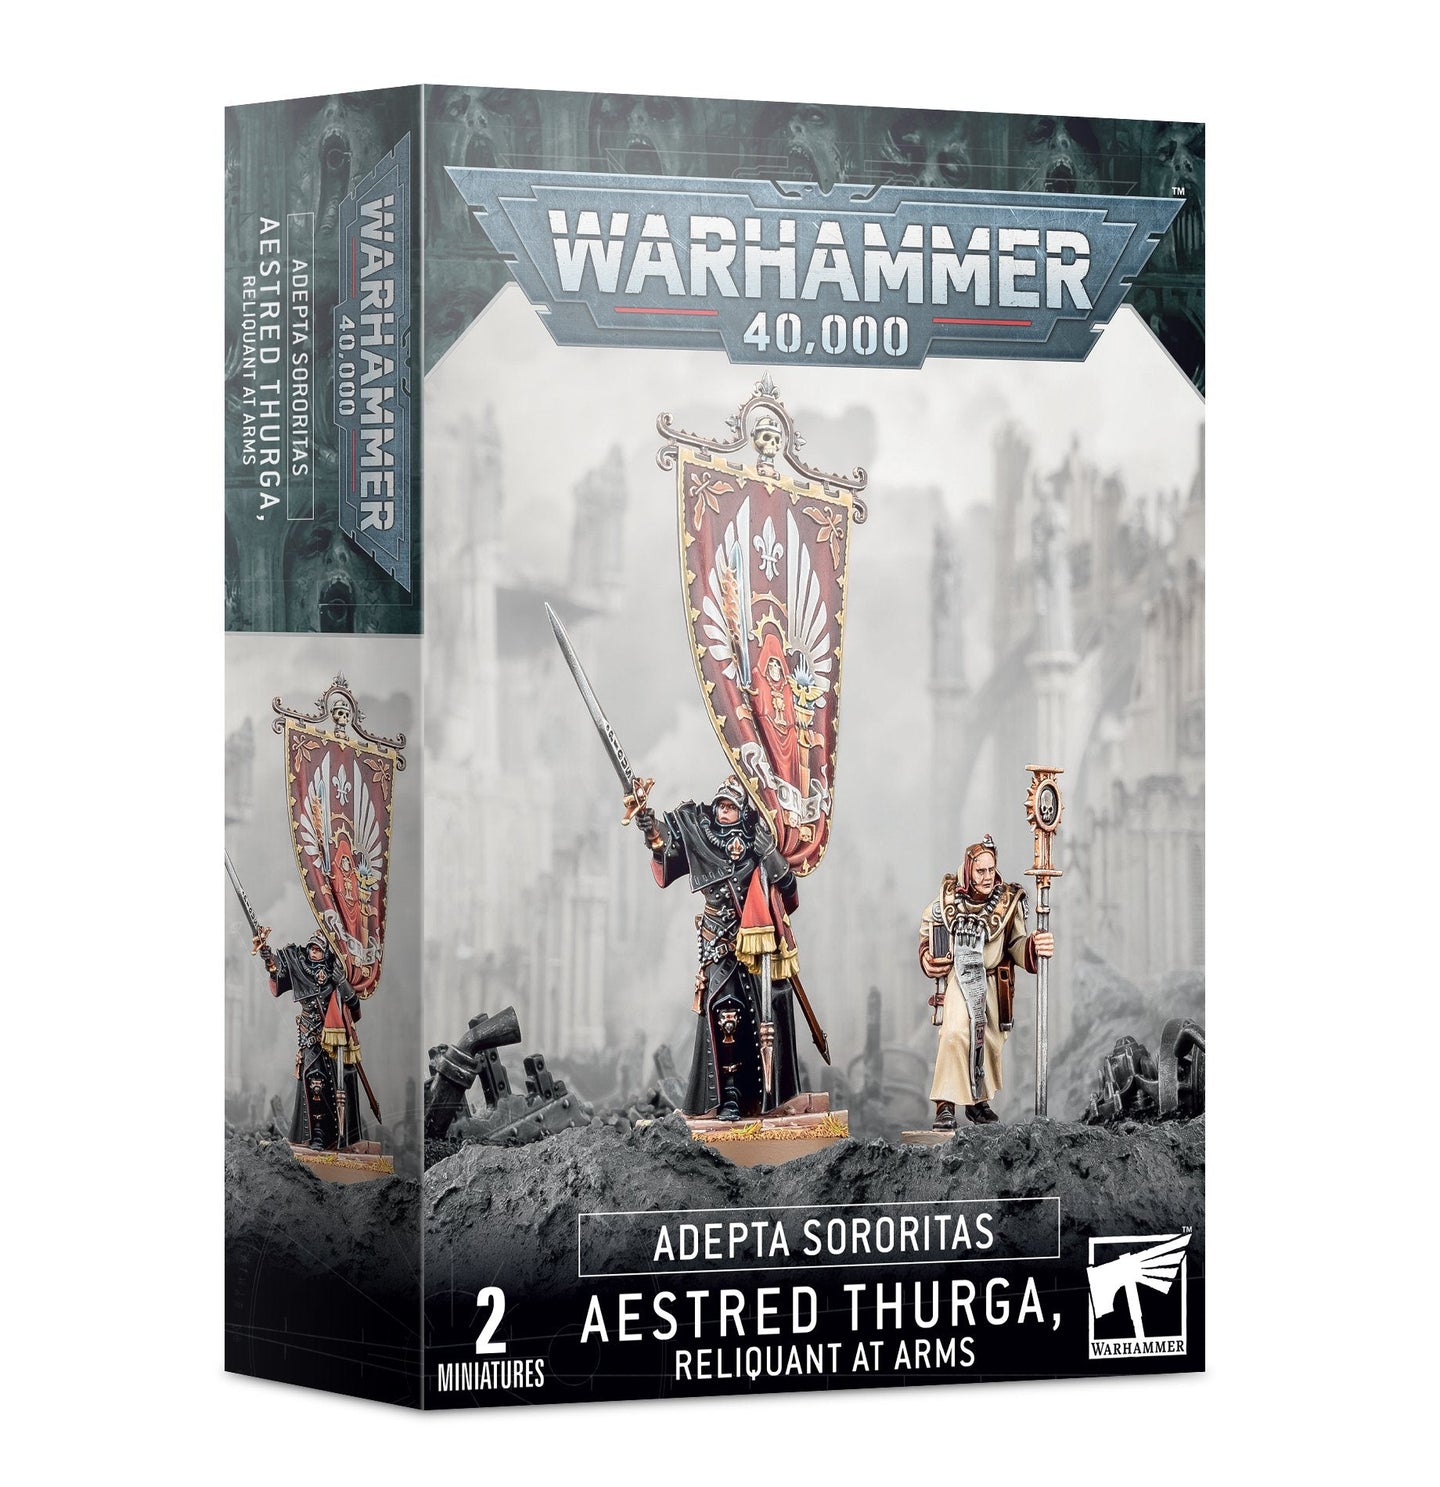 aestred thurga relinquant at arms Warhammer 40k Games Workshop